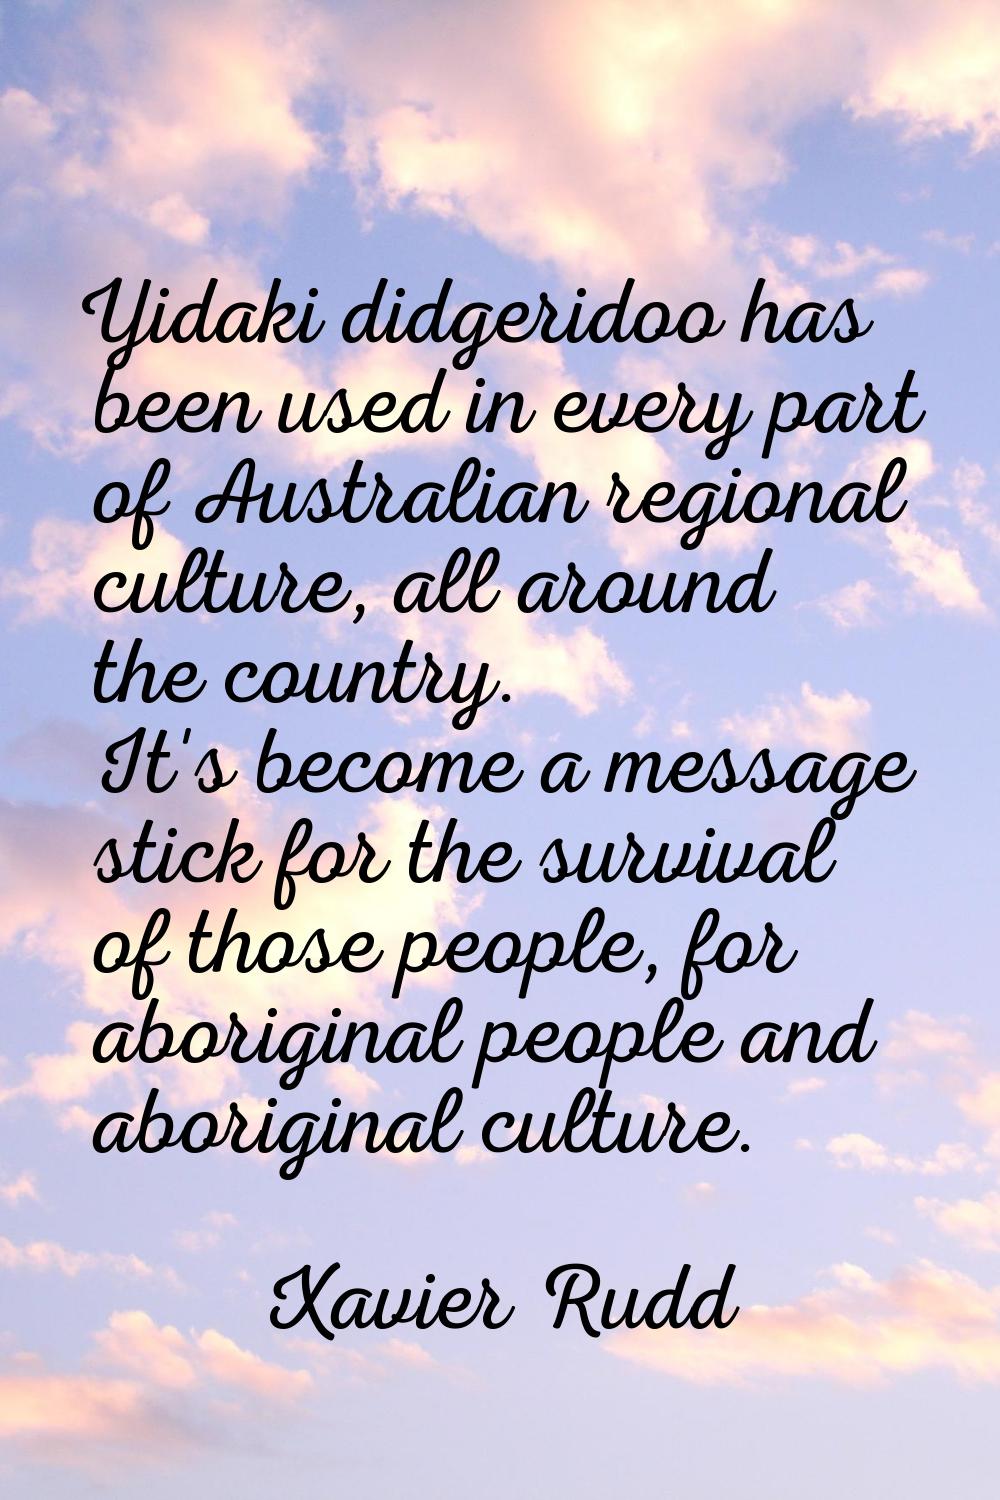 Yidaki didgeridoo has been used in every part of Australian regional culture, all around the countr